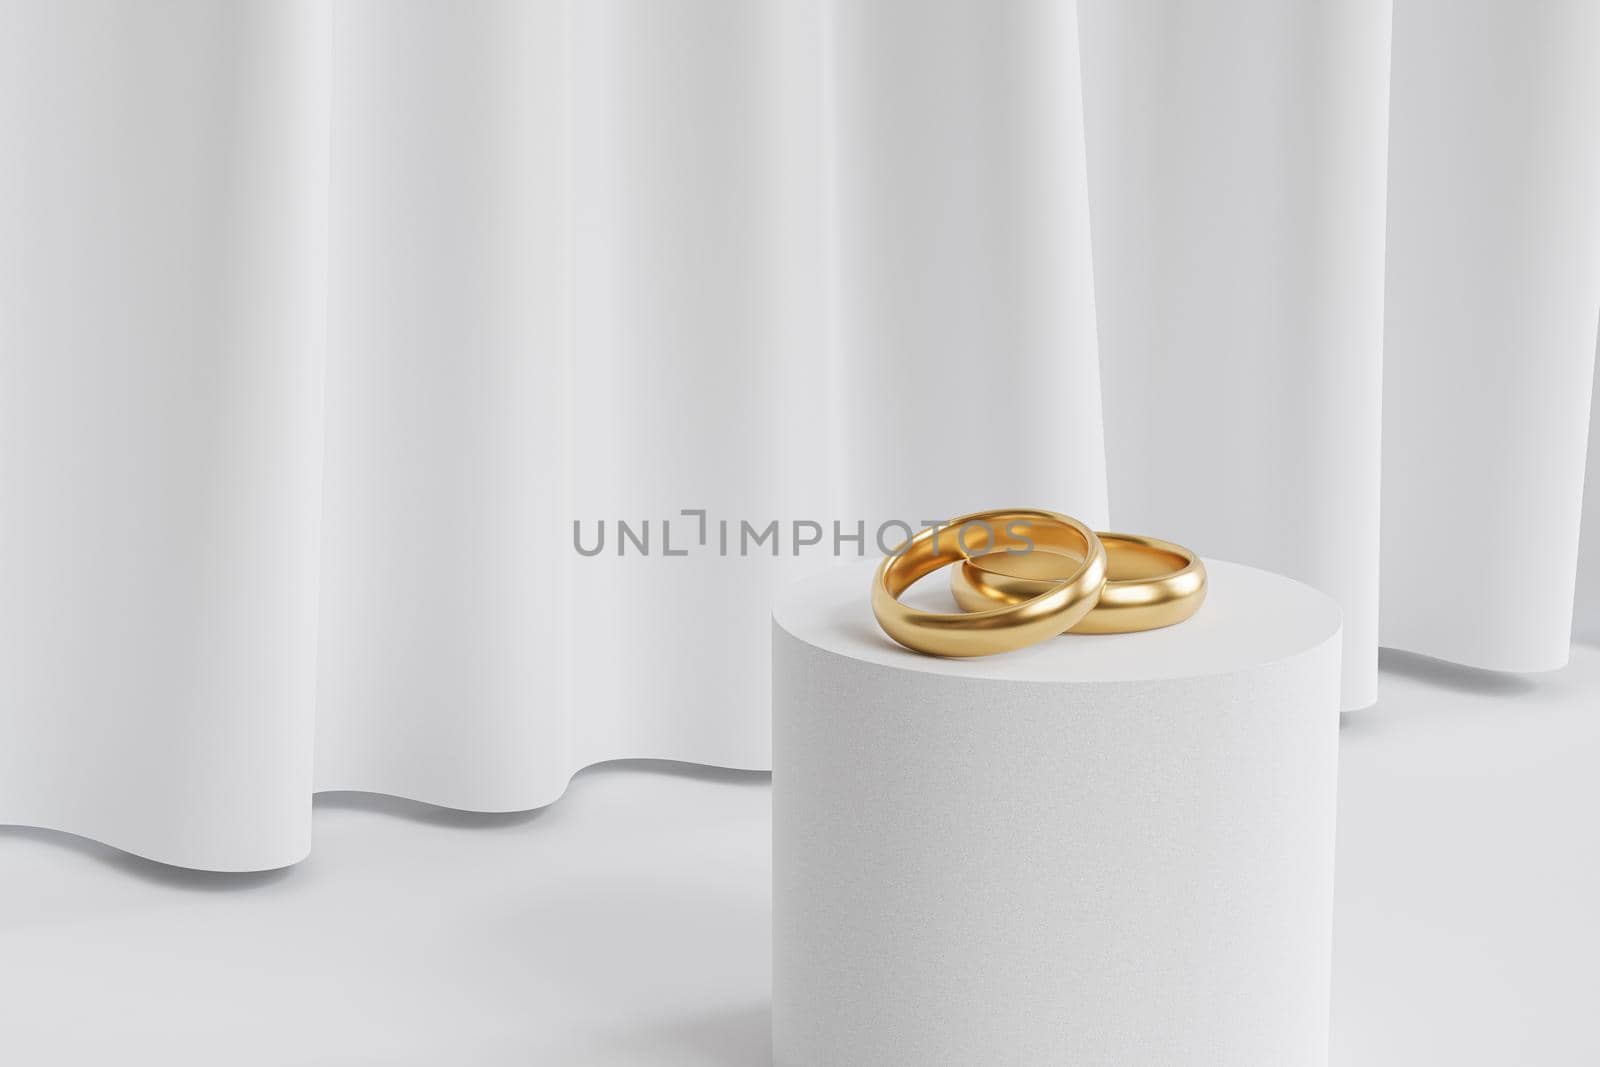 Two golden wedding rings on podium or pedestal, background with white curtains, 3d render